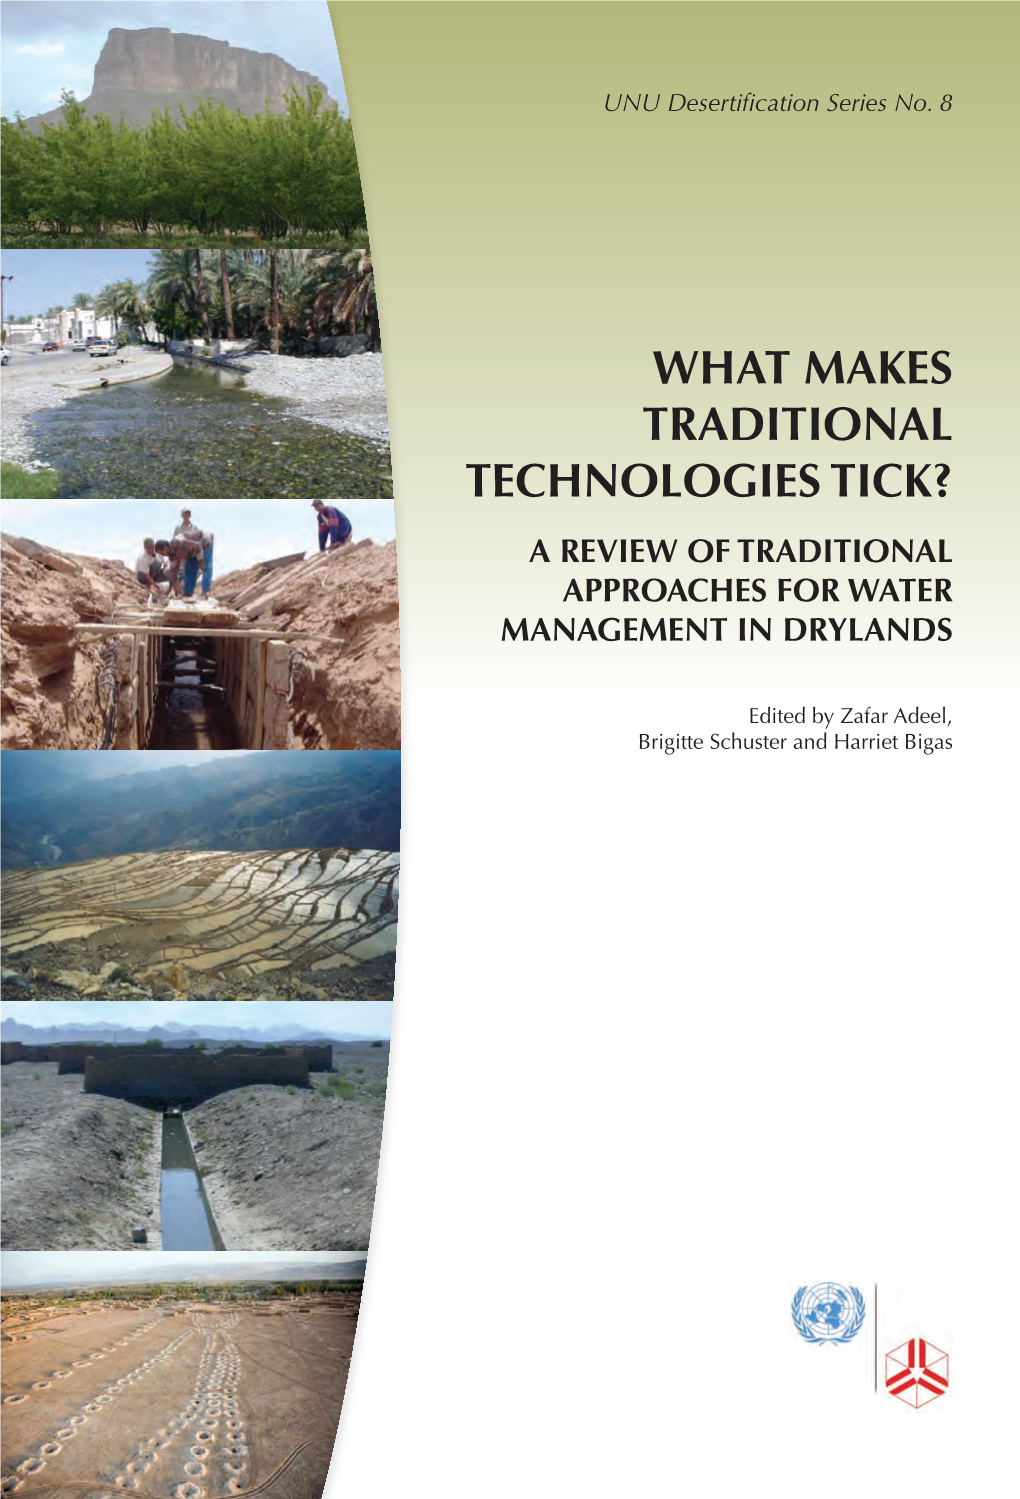 What Makes Traditional Technologies Tick? a Review of Traditional Approaches for Water Management in Drylands